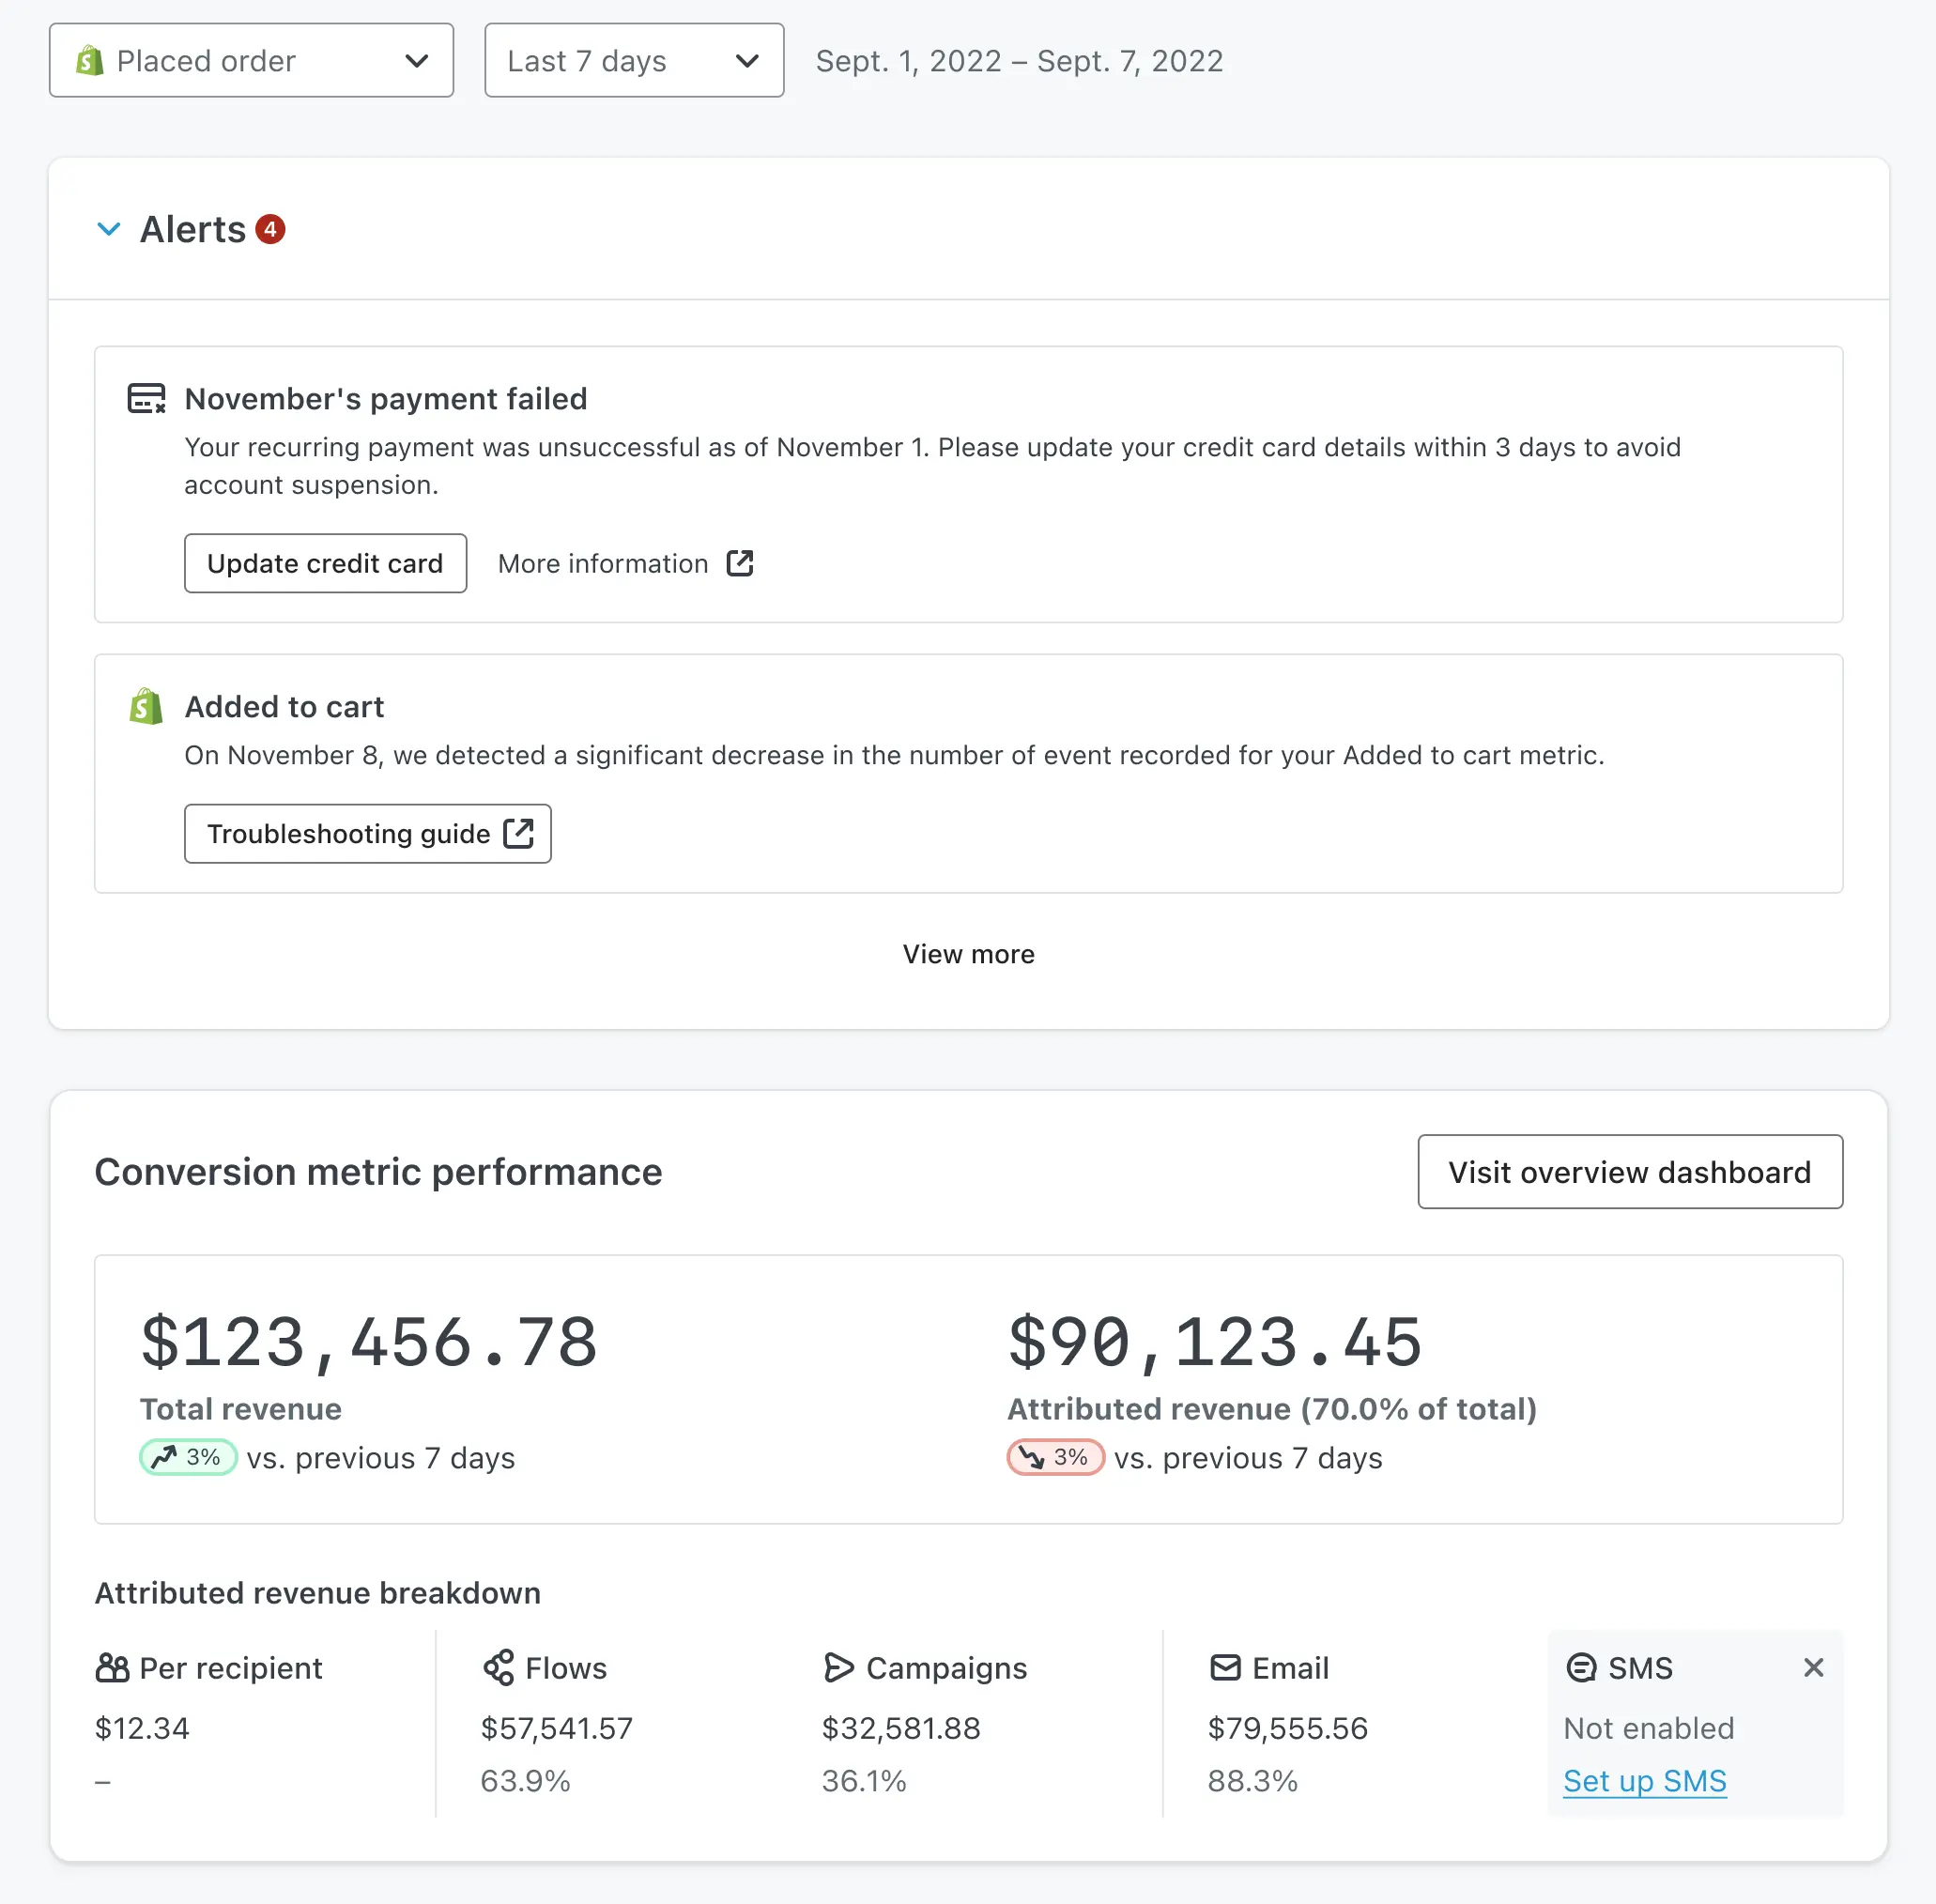 The new homepage dashboard shows key alerts and account performance